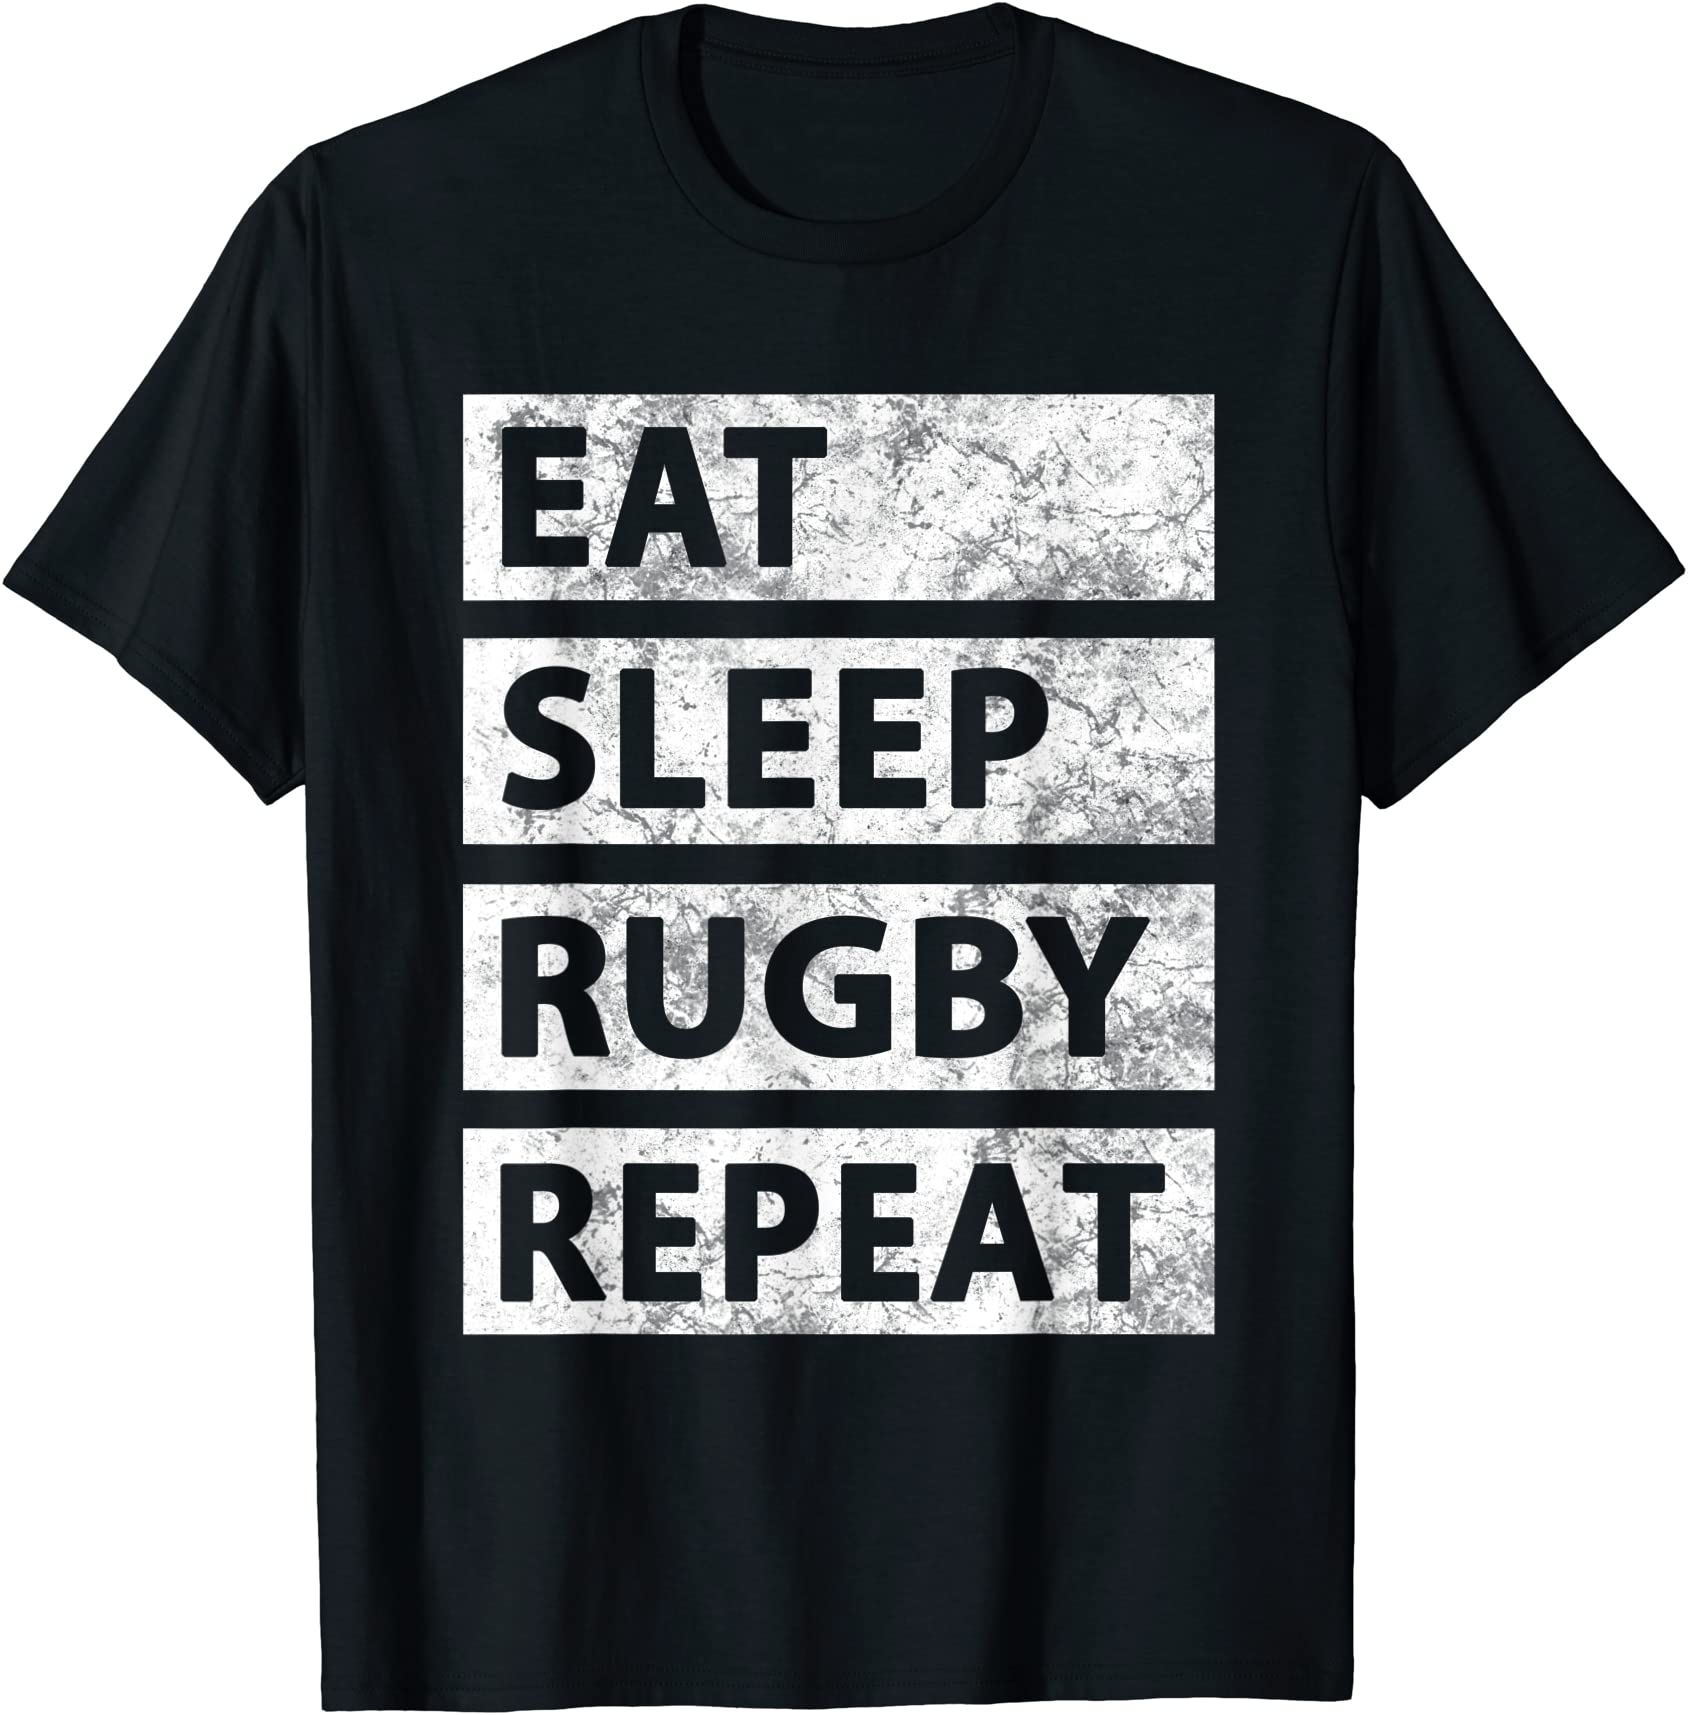 rugby player eat sleep rugby repeat funny rugby t shirt men - Buy t ...